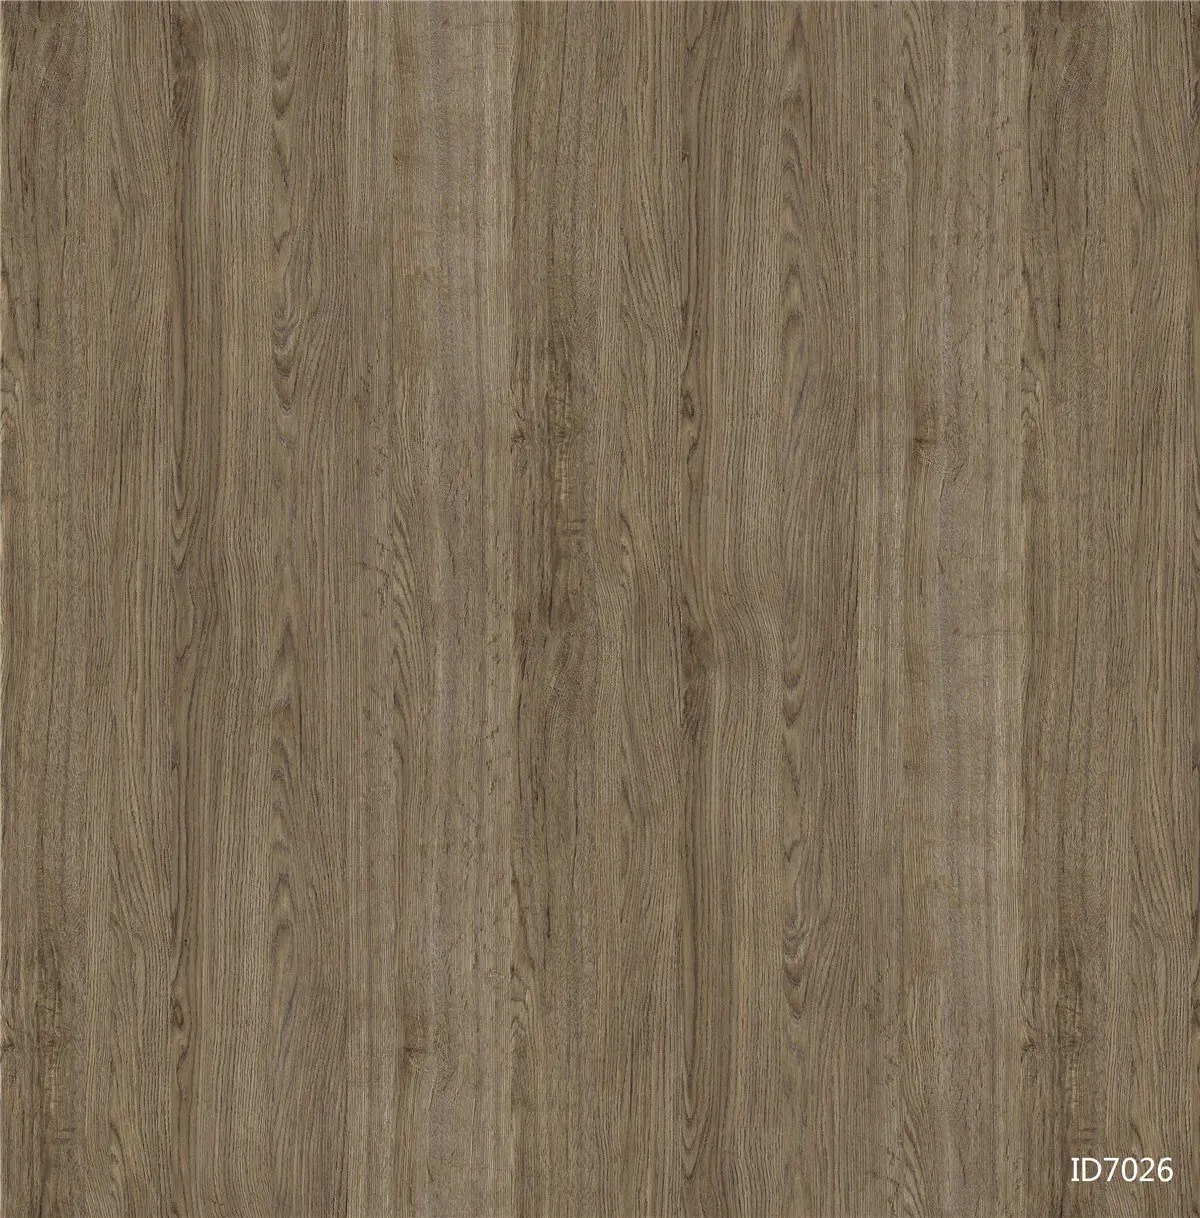 stable decorative paper laminate chestnut series for guest room